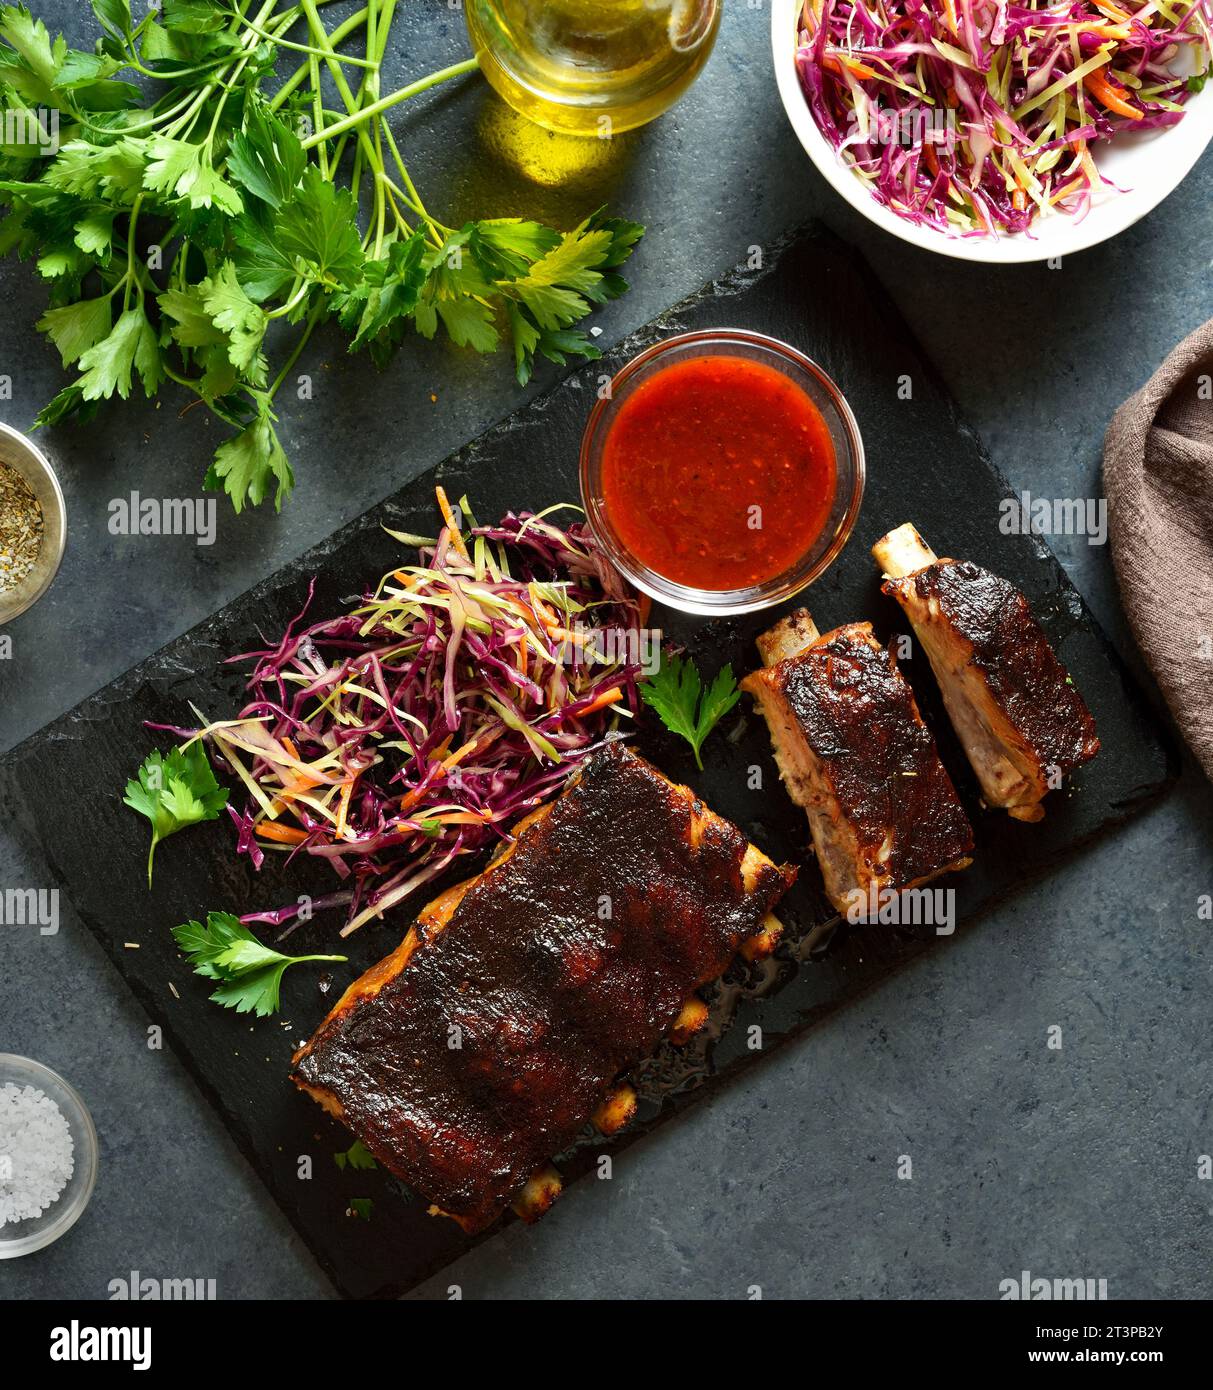 Spicy grilled spare ribs with red cabbage salad and sauce on board over dark stone background. Top view, flat lay Stock Photo